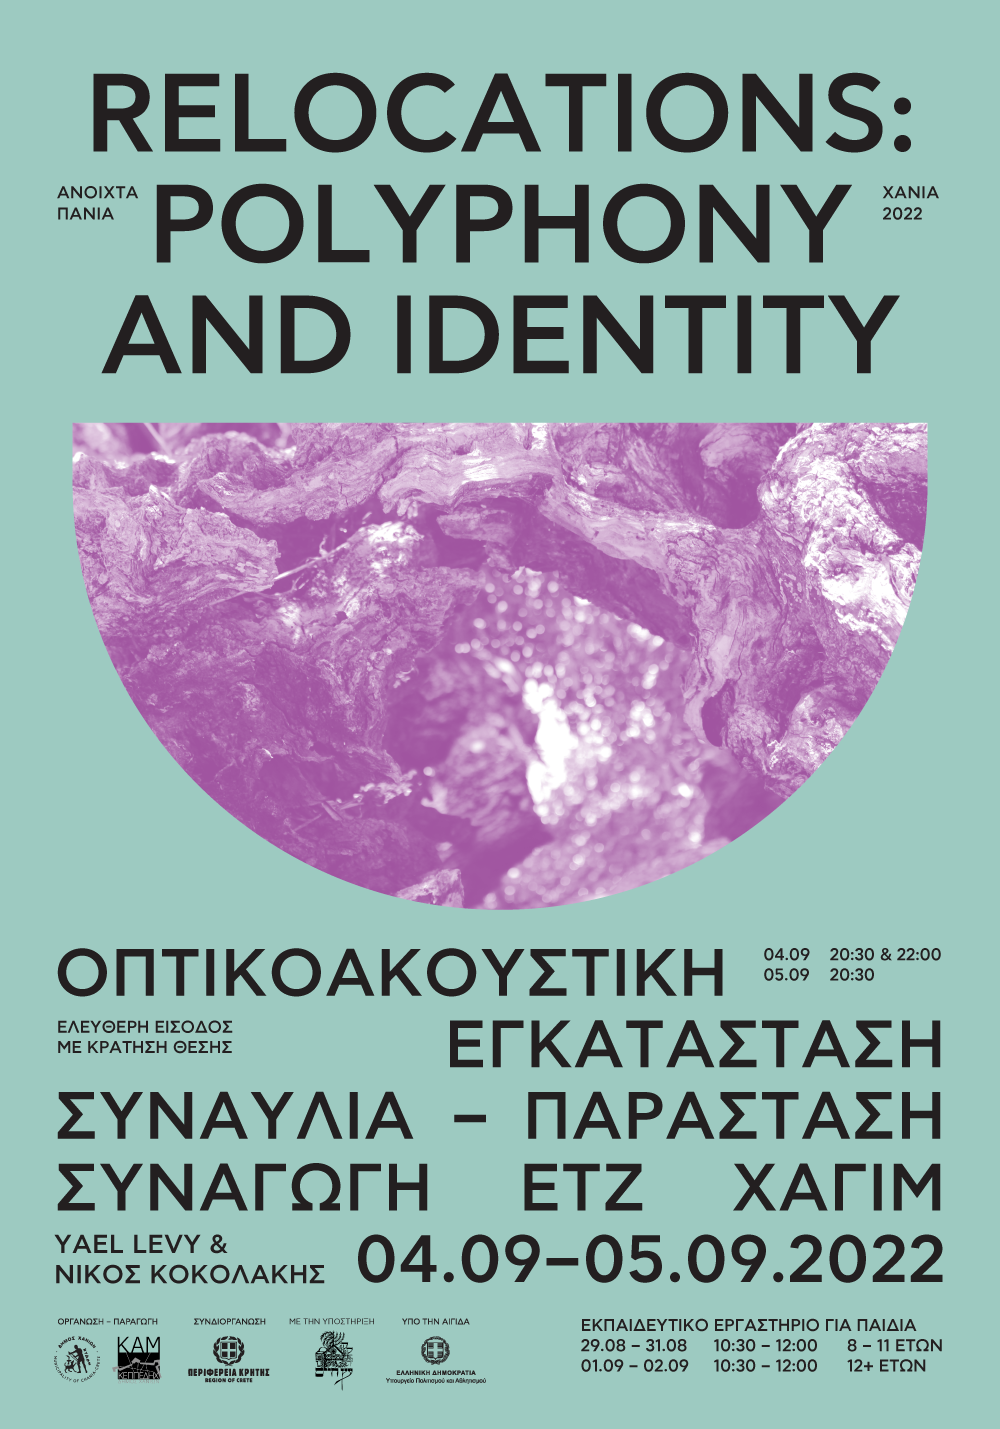 Relocations: Polyphony and Identity – Ανοιχτά Πανιά 2022